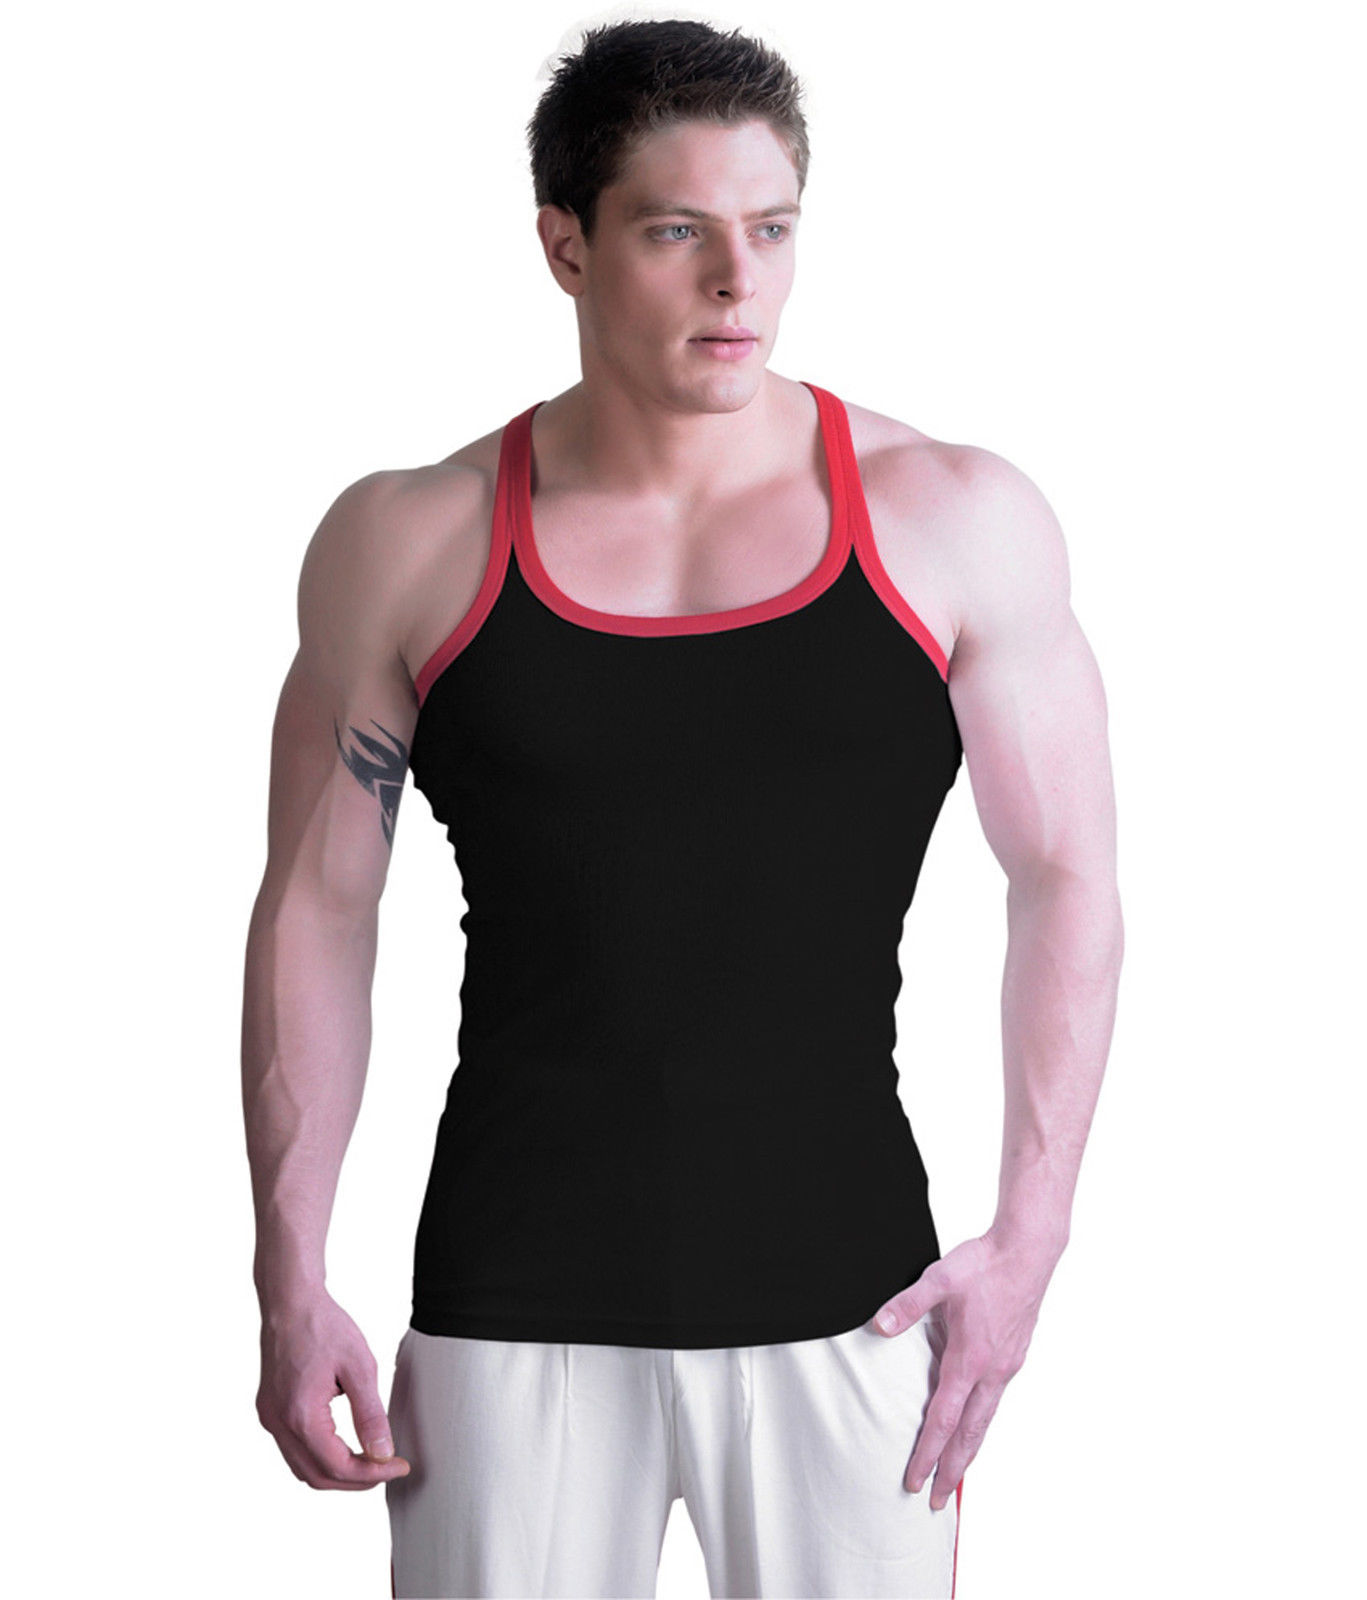 Buy Amul Macho Sporto color Gym vest Pack of 5 Online @ ₹820 from ShopClues